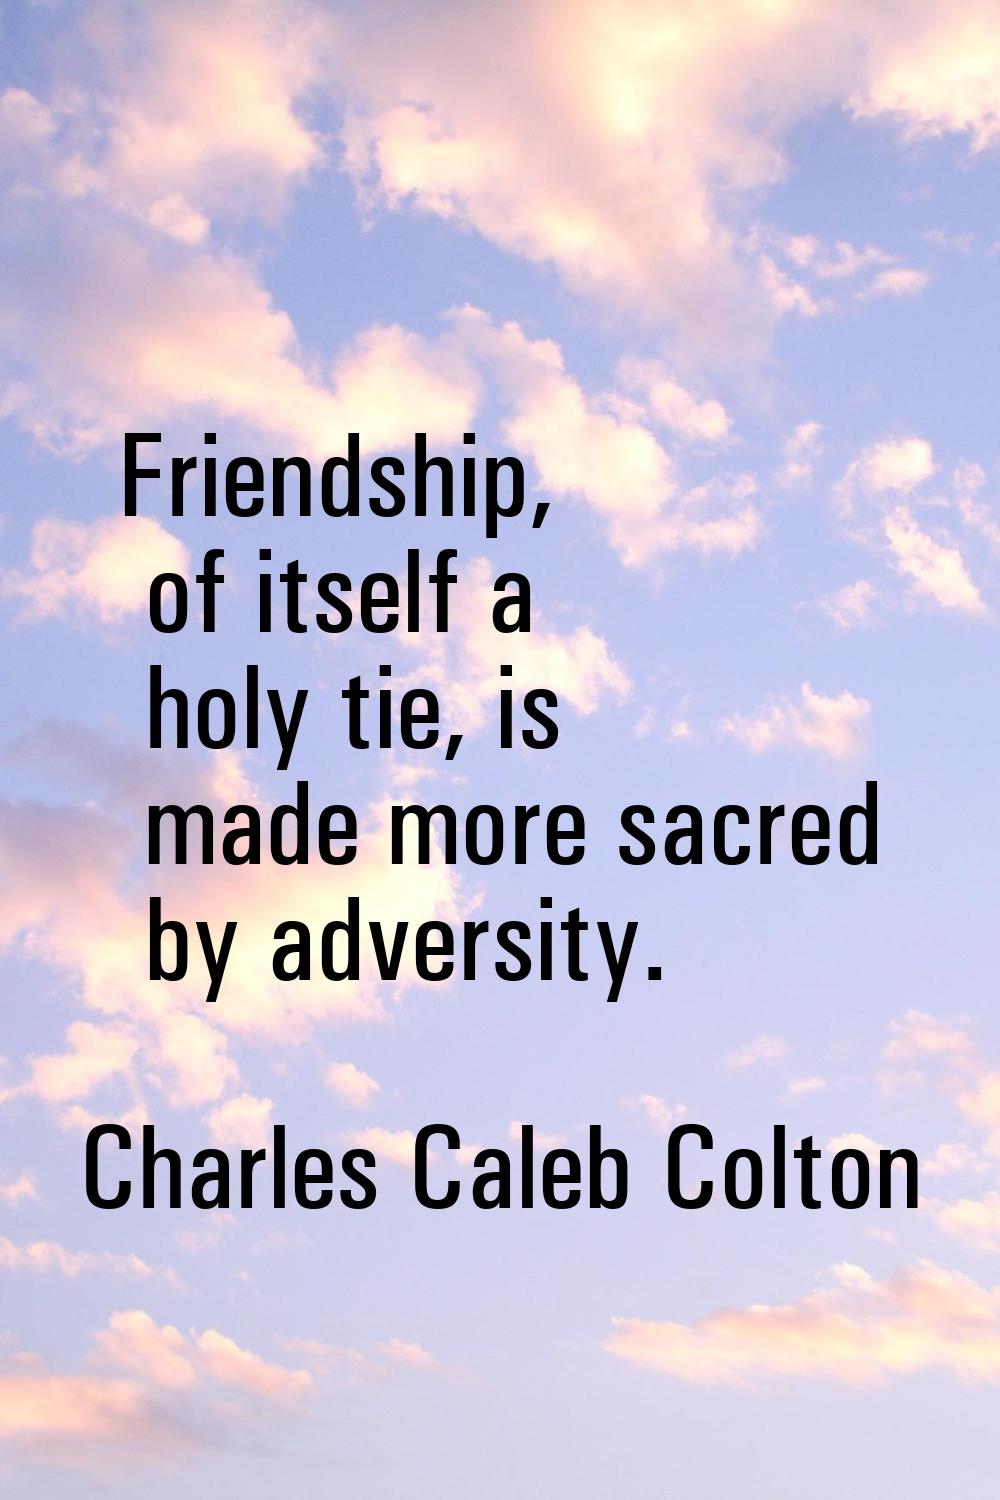 Friendship, of itself a holy tie, is made more sacred by adversity.